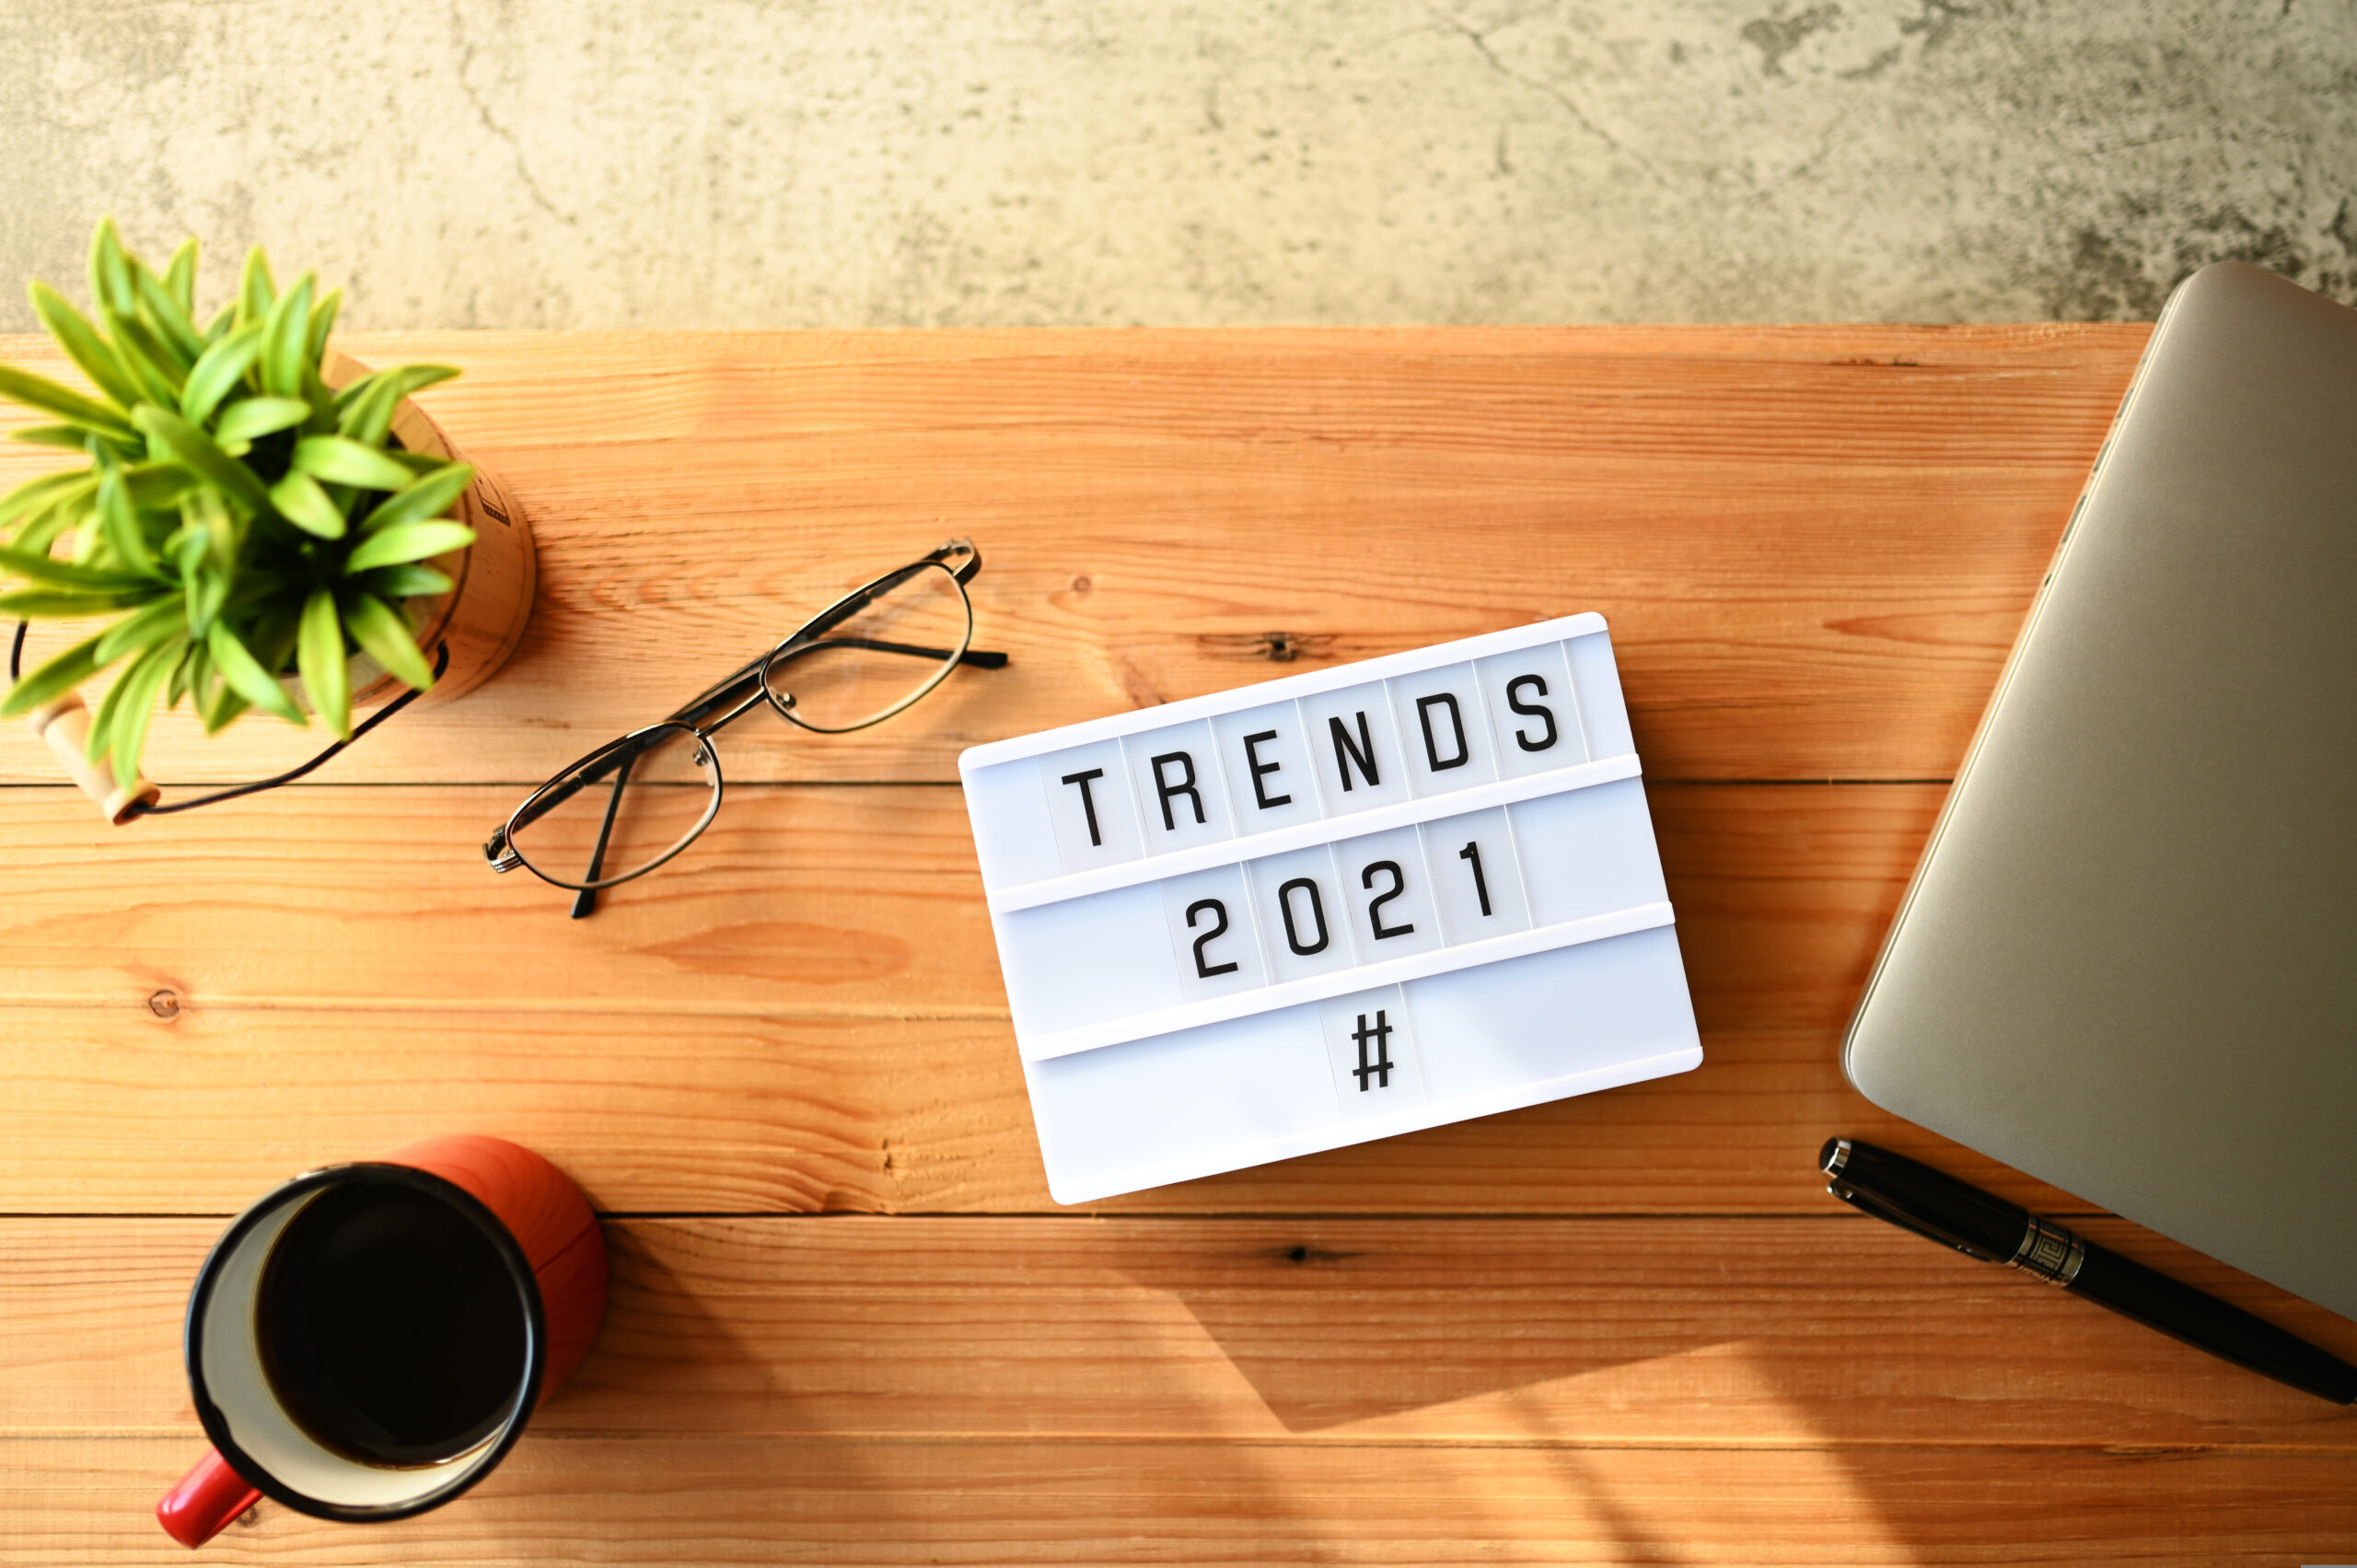 Digital Marketing Trends to Watch Out for in 2021